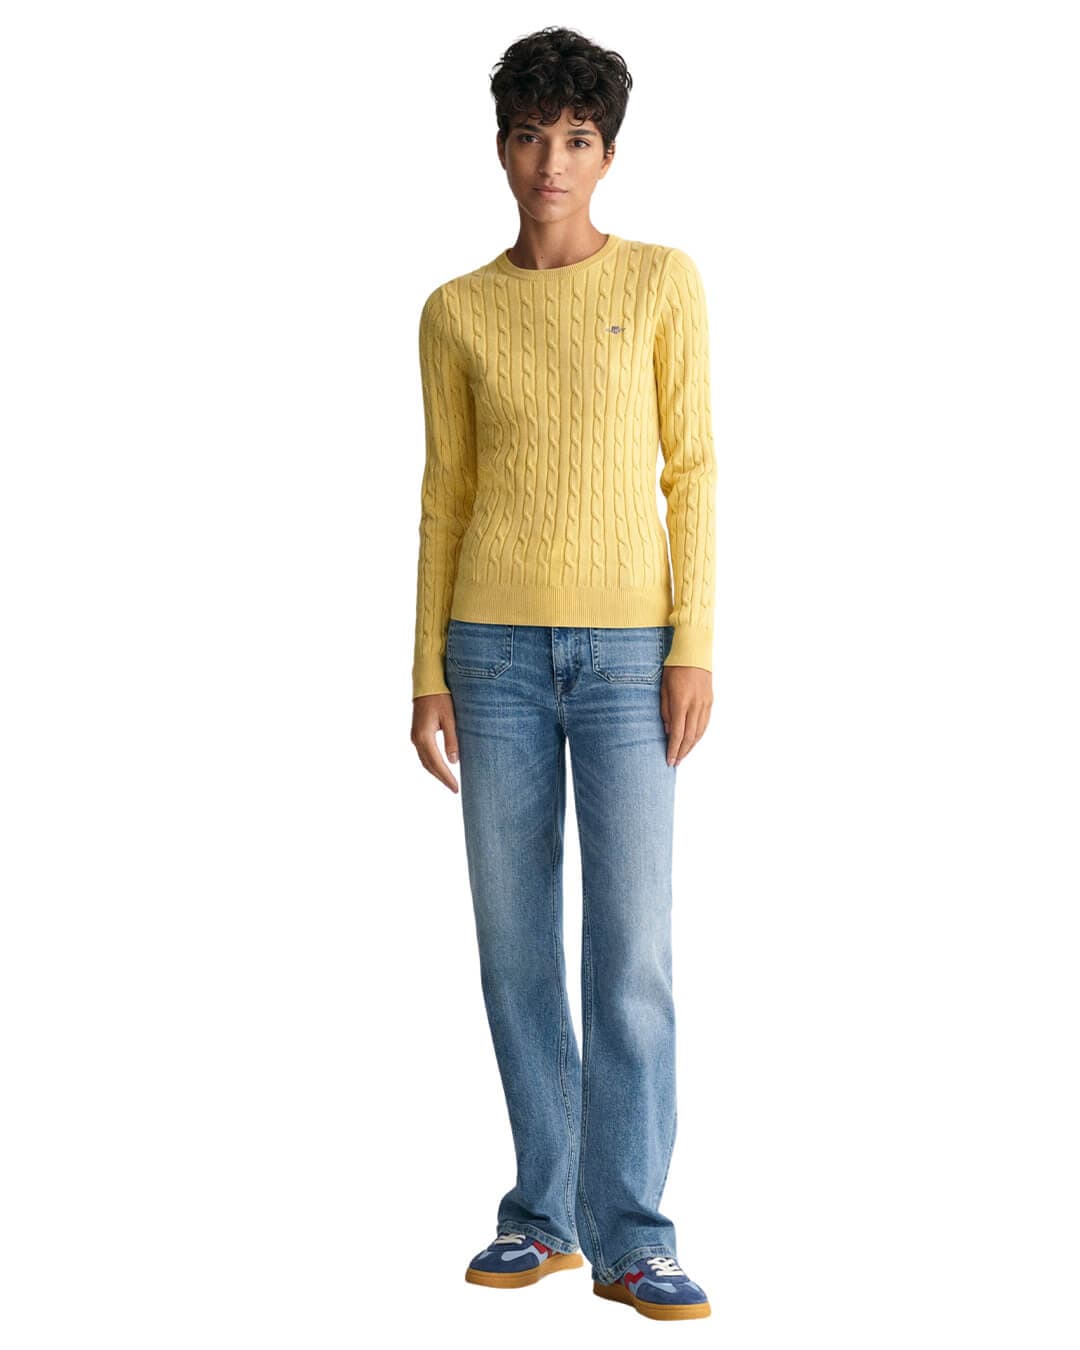 Gant Jumpers Gant Yellow Stretch Cotton Cable Knit Crew Neck Sweater